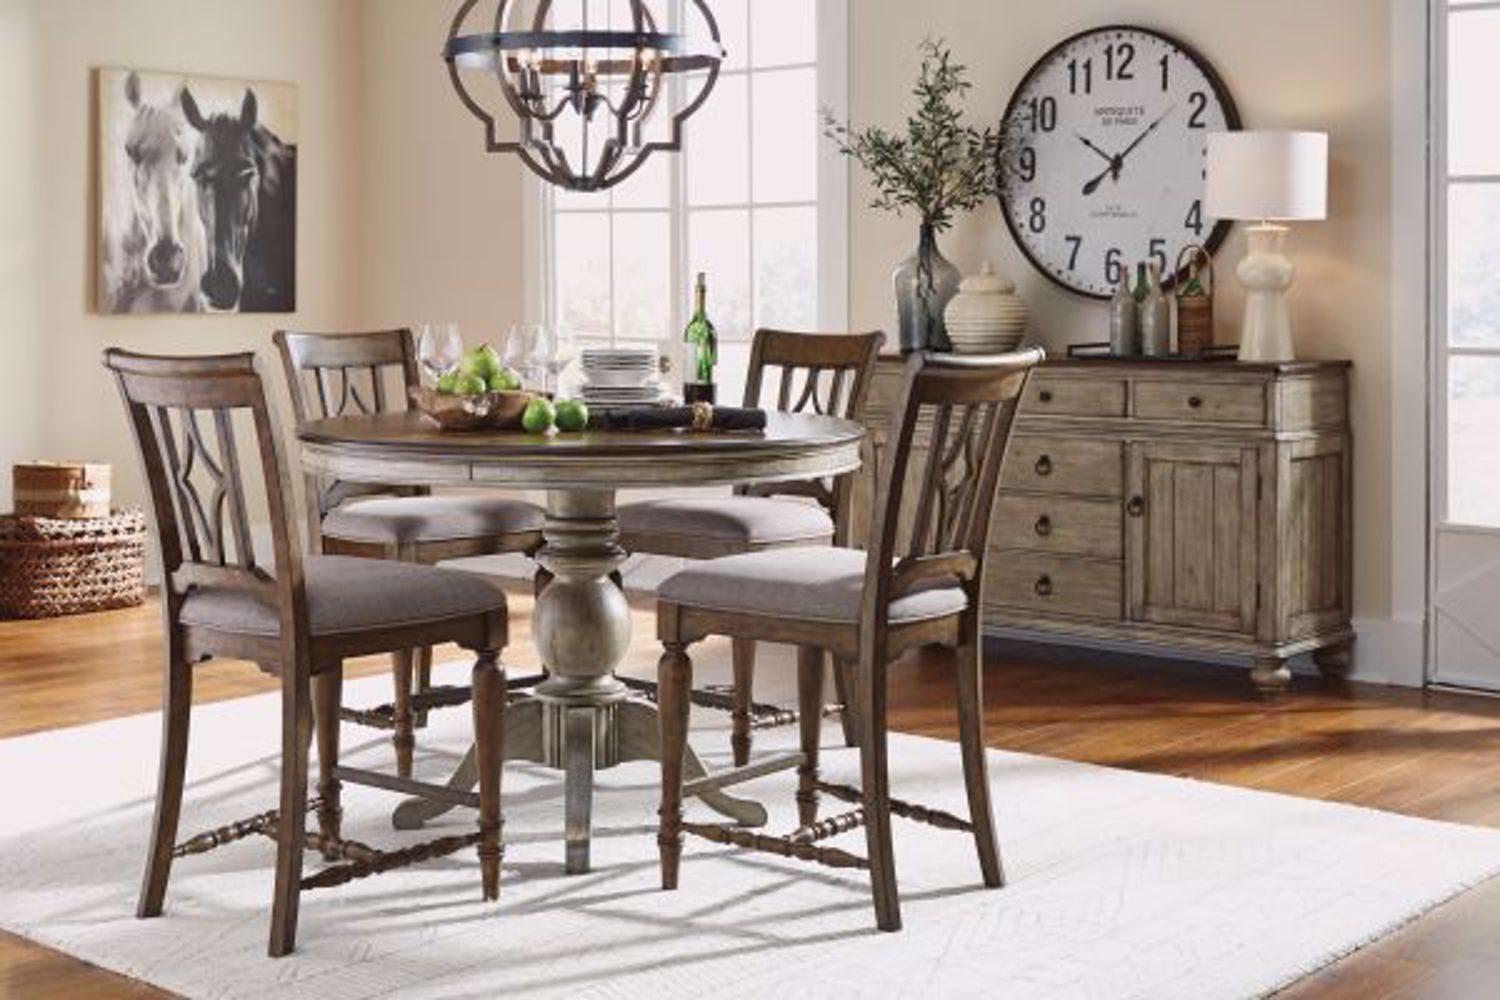 Plymouth Round Counter Dining Room Set regarding measurements 1500 X 1000